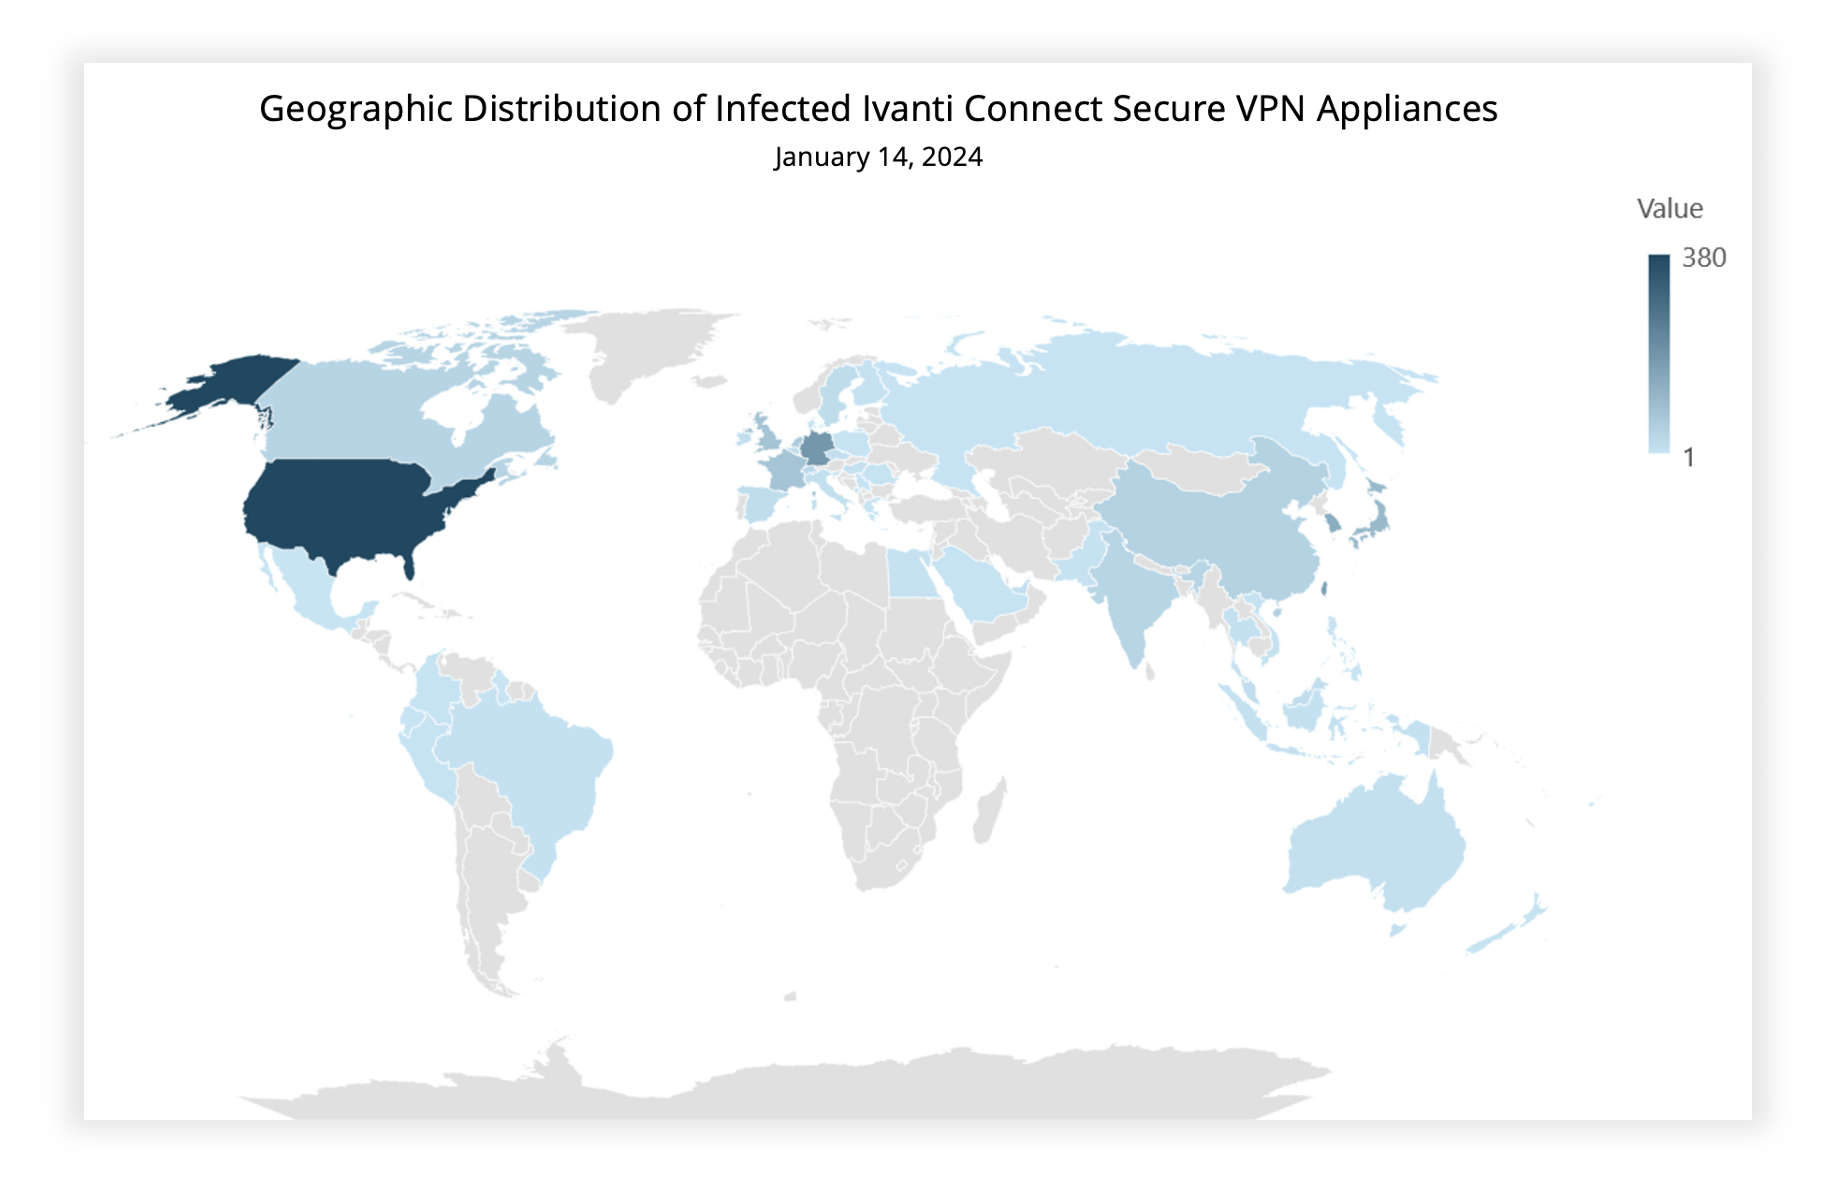 Geographic distribution of infected ICS VPN appliances